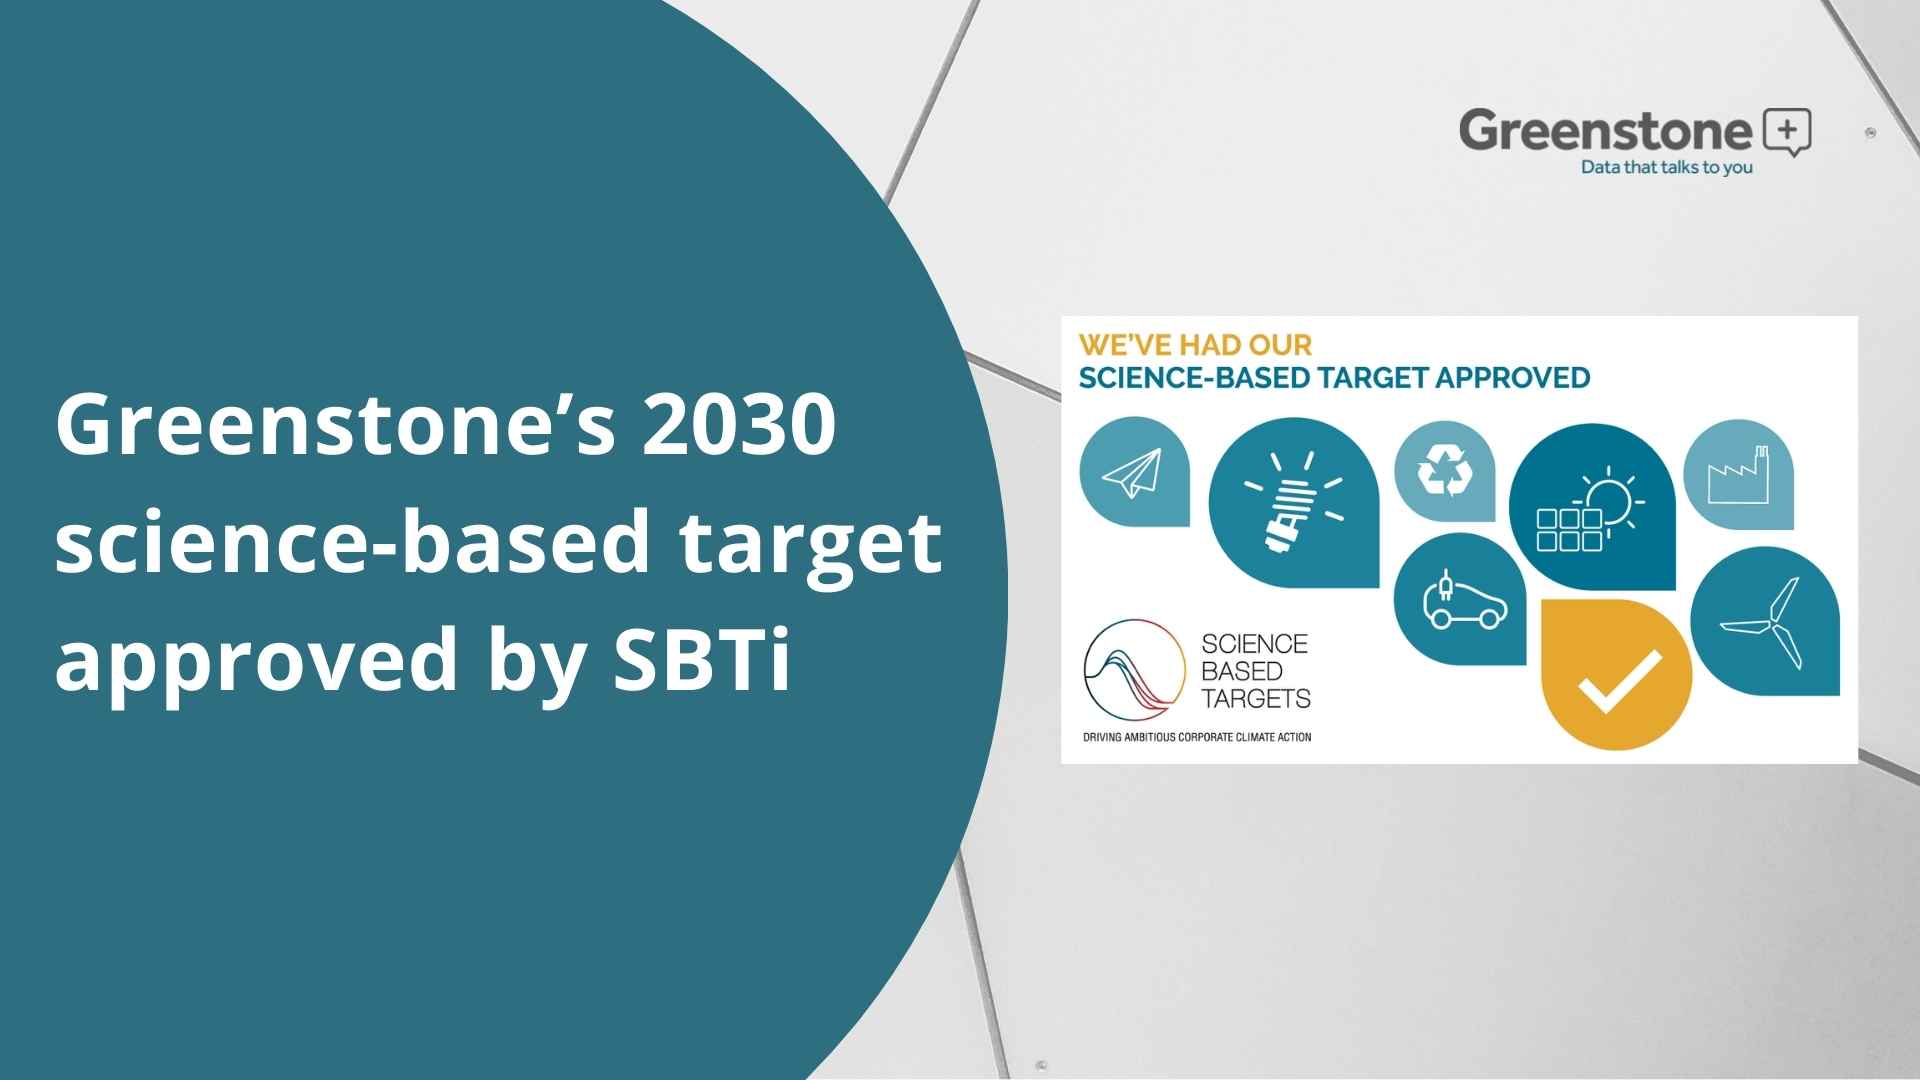 Greenstone’s 2030 science-based target approved by SBTi